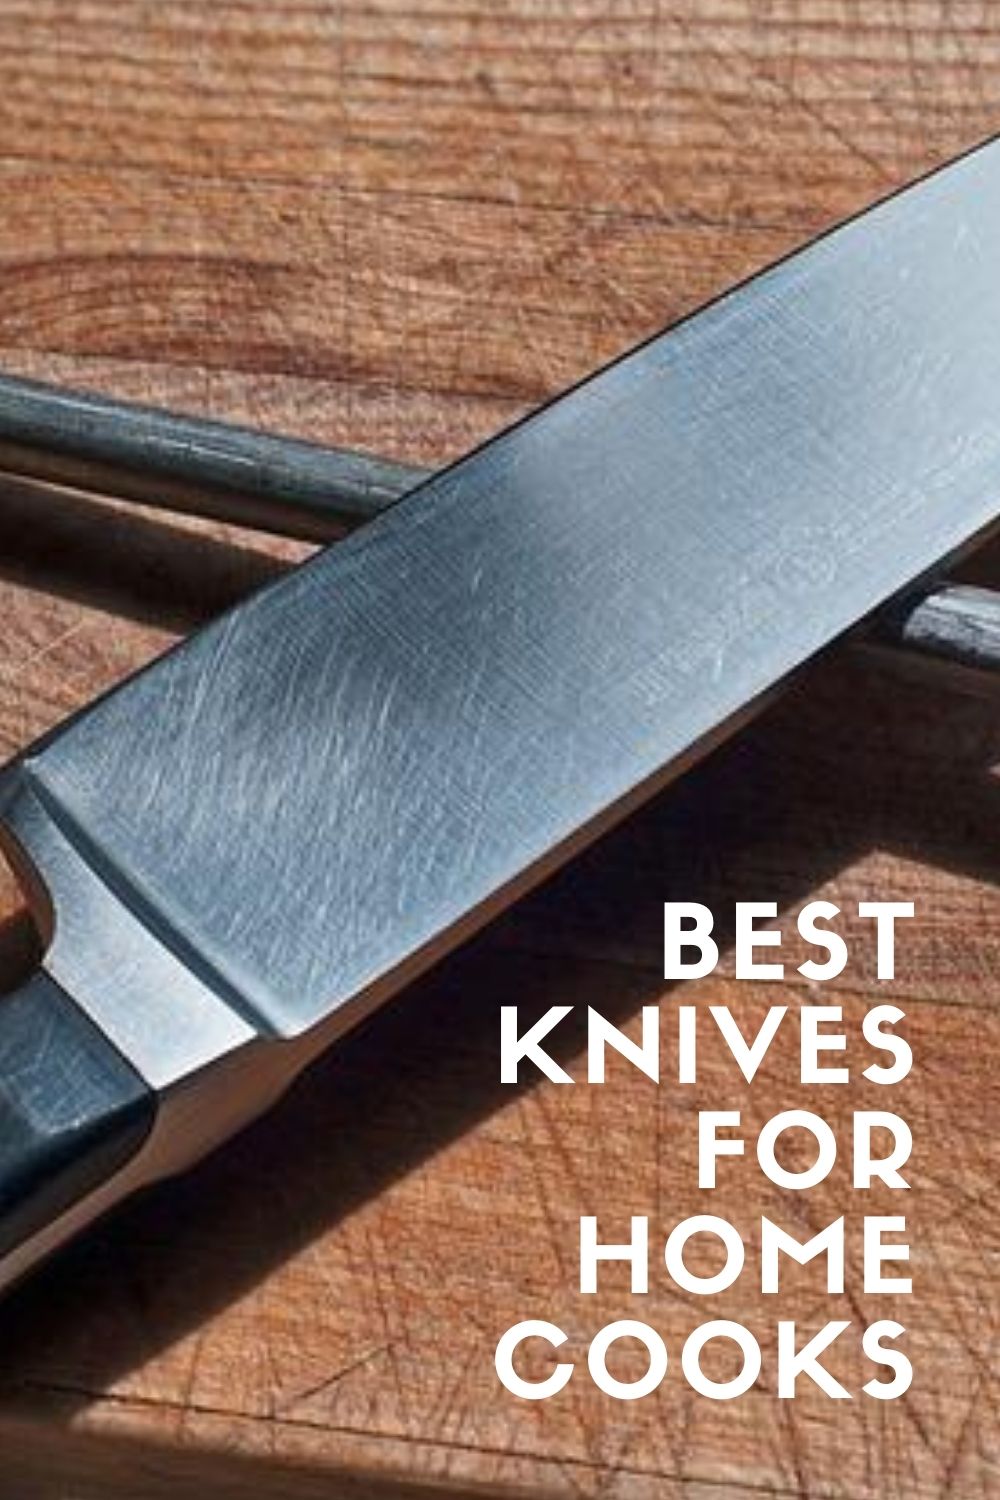 best knives & knife sets for home cooks graphic